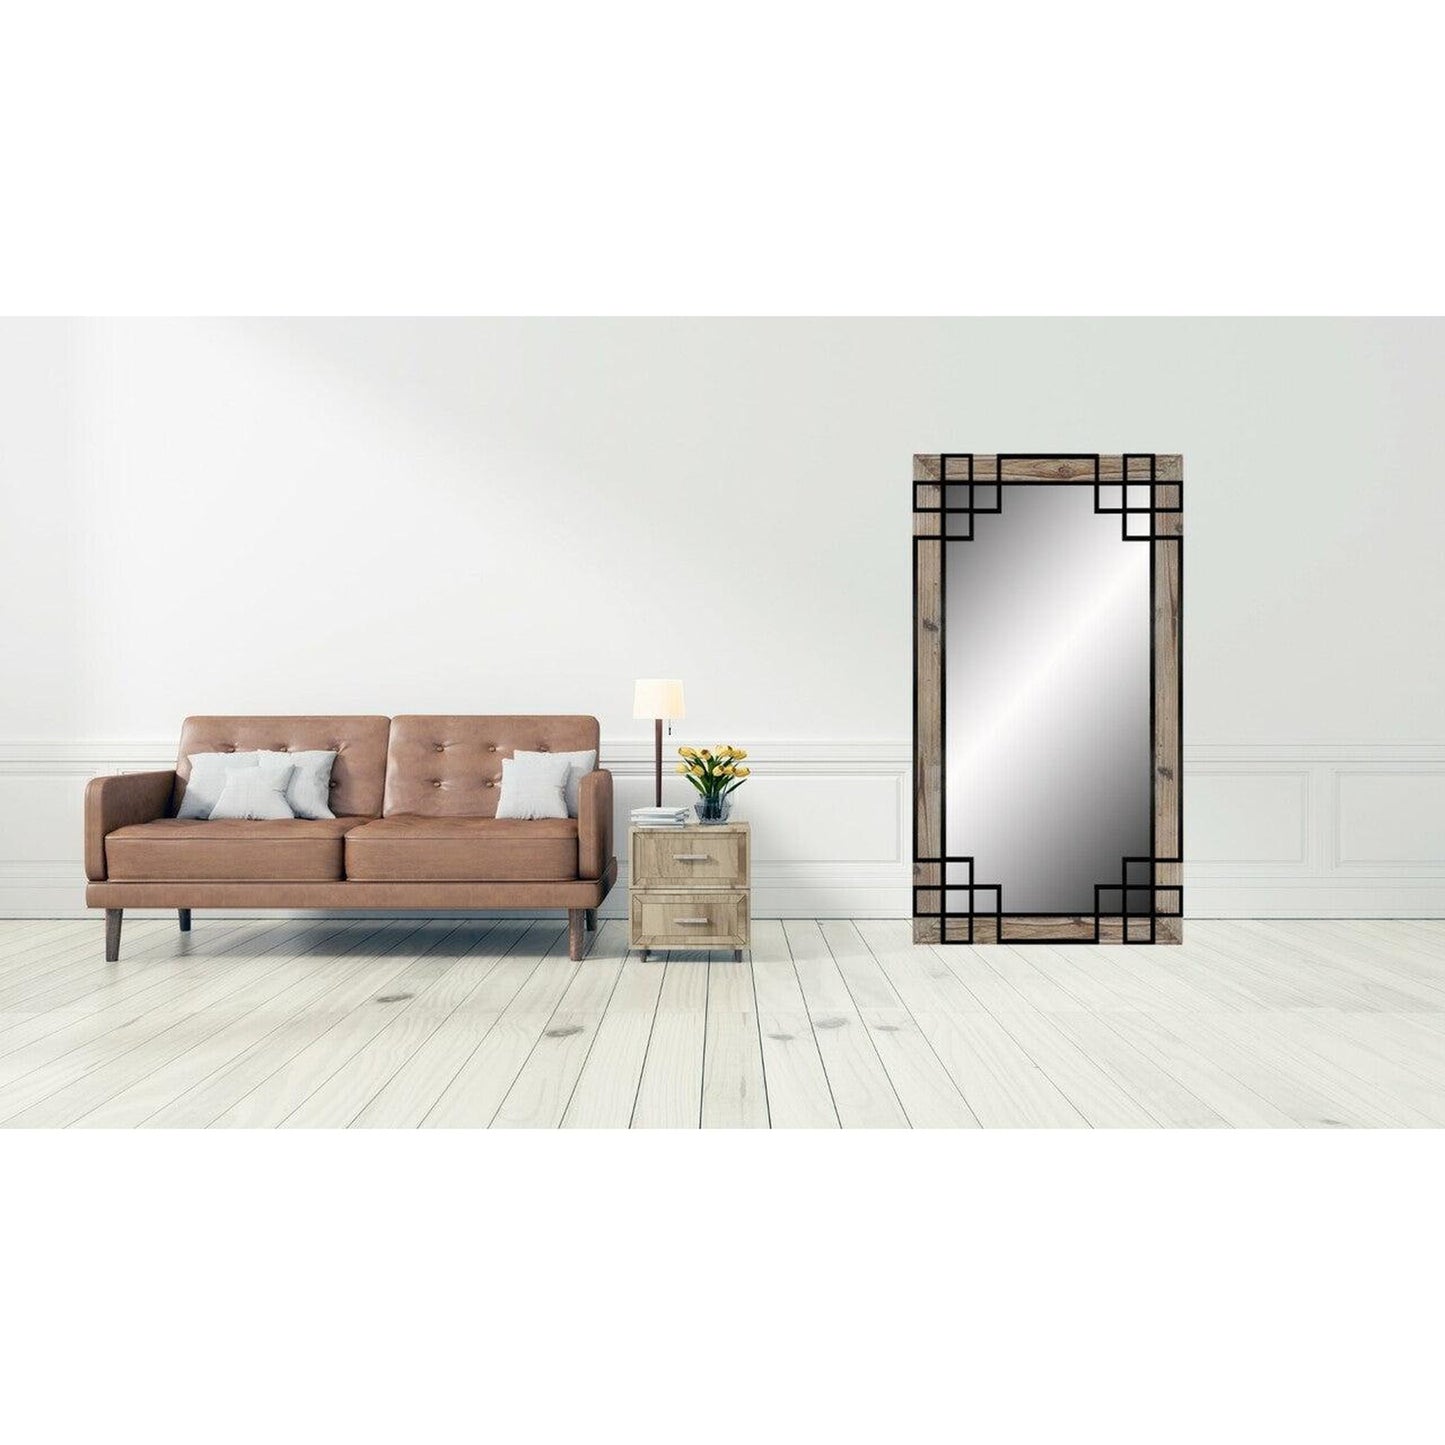 SBC Decor Elegant 46" x 84" Wall-Mounted Wood Frame Leaner Dresser Mirror In Rustic with Black Iron Overlay Finish